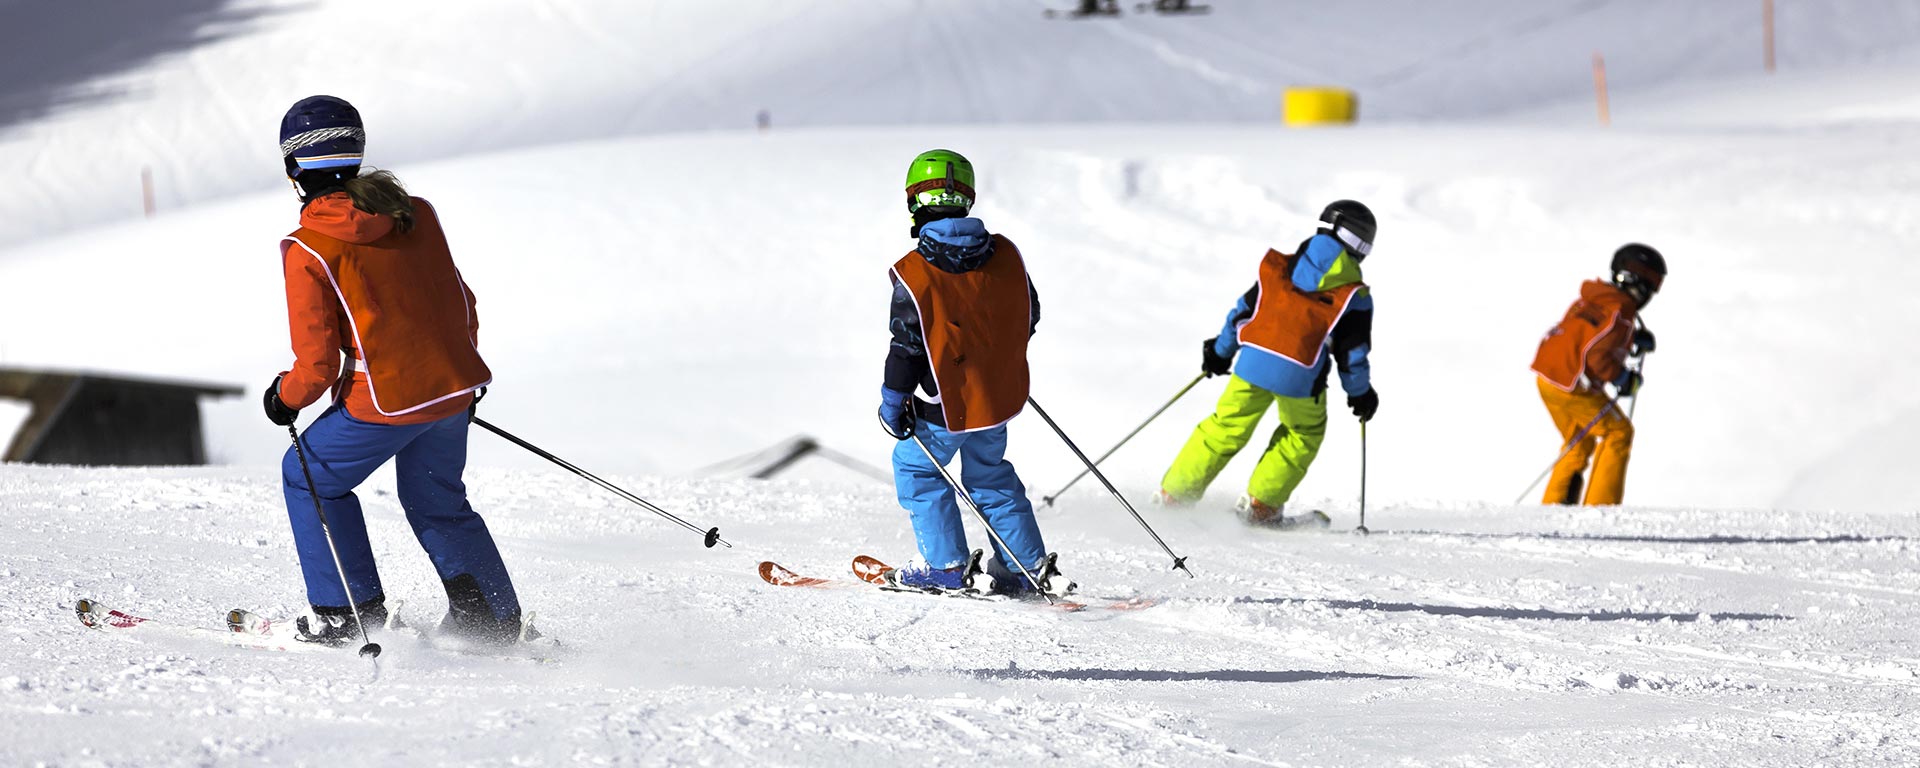 some kids with orange vests during a ski course organised by a ski school